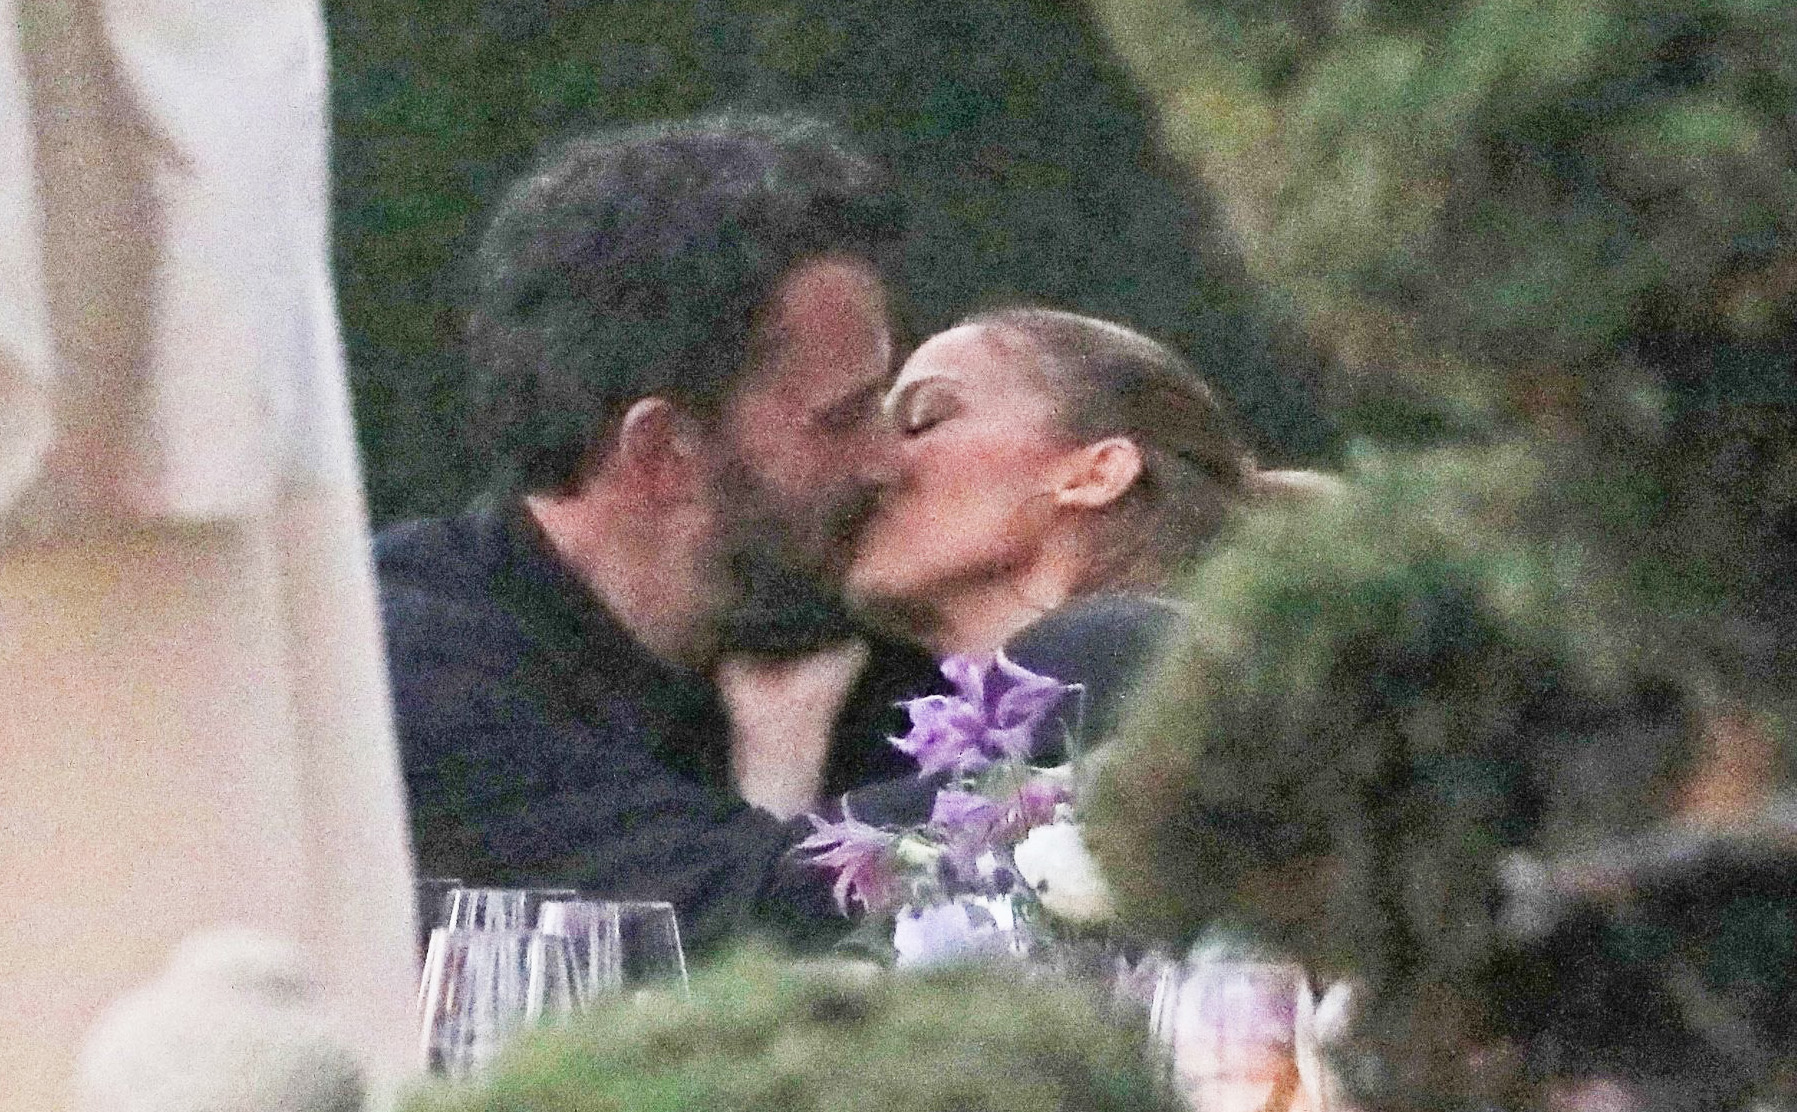 Finally Ben Affleck and Jennifer Lopez Hot Kisses At Lunch – They’re Together Again!